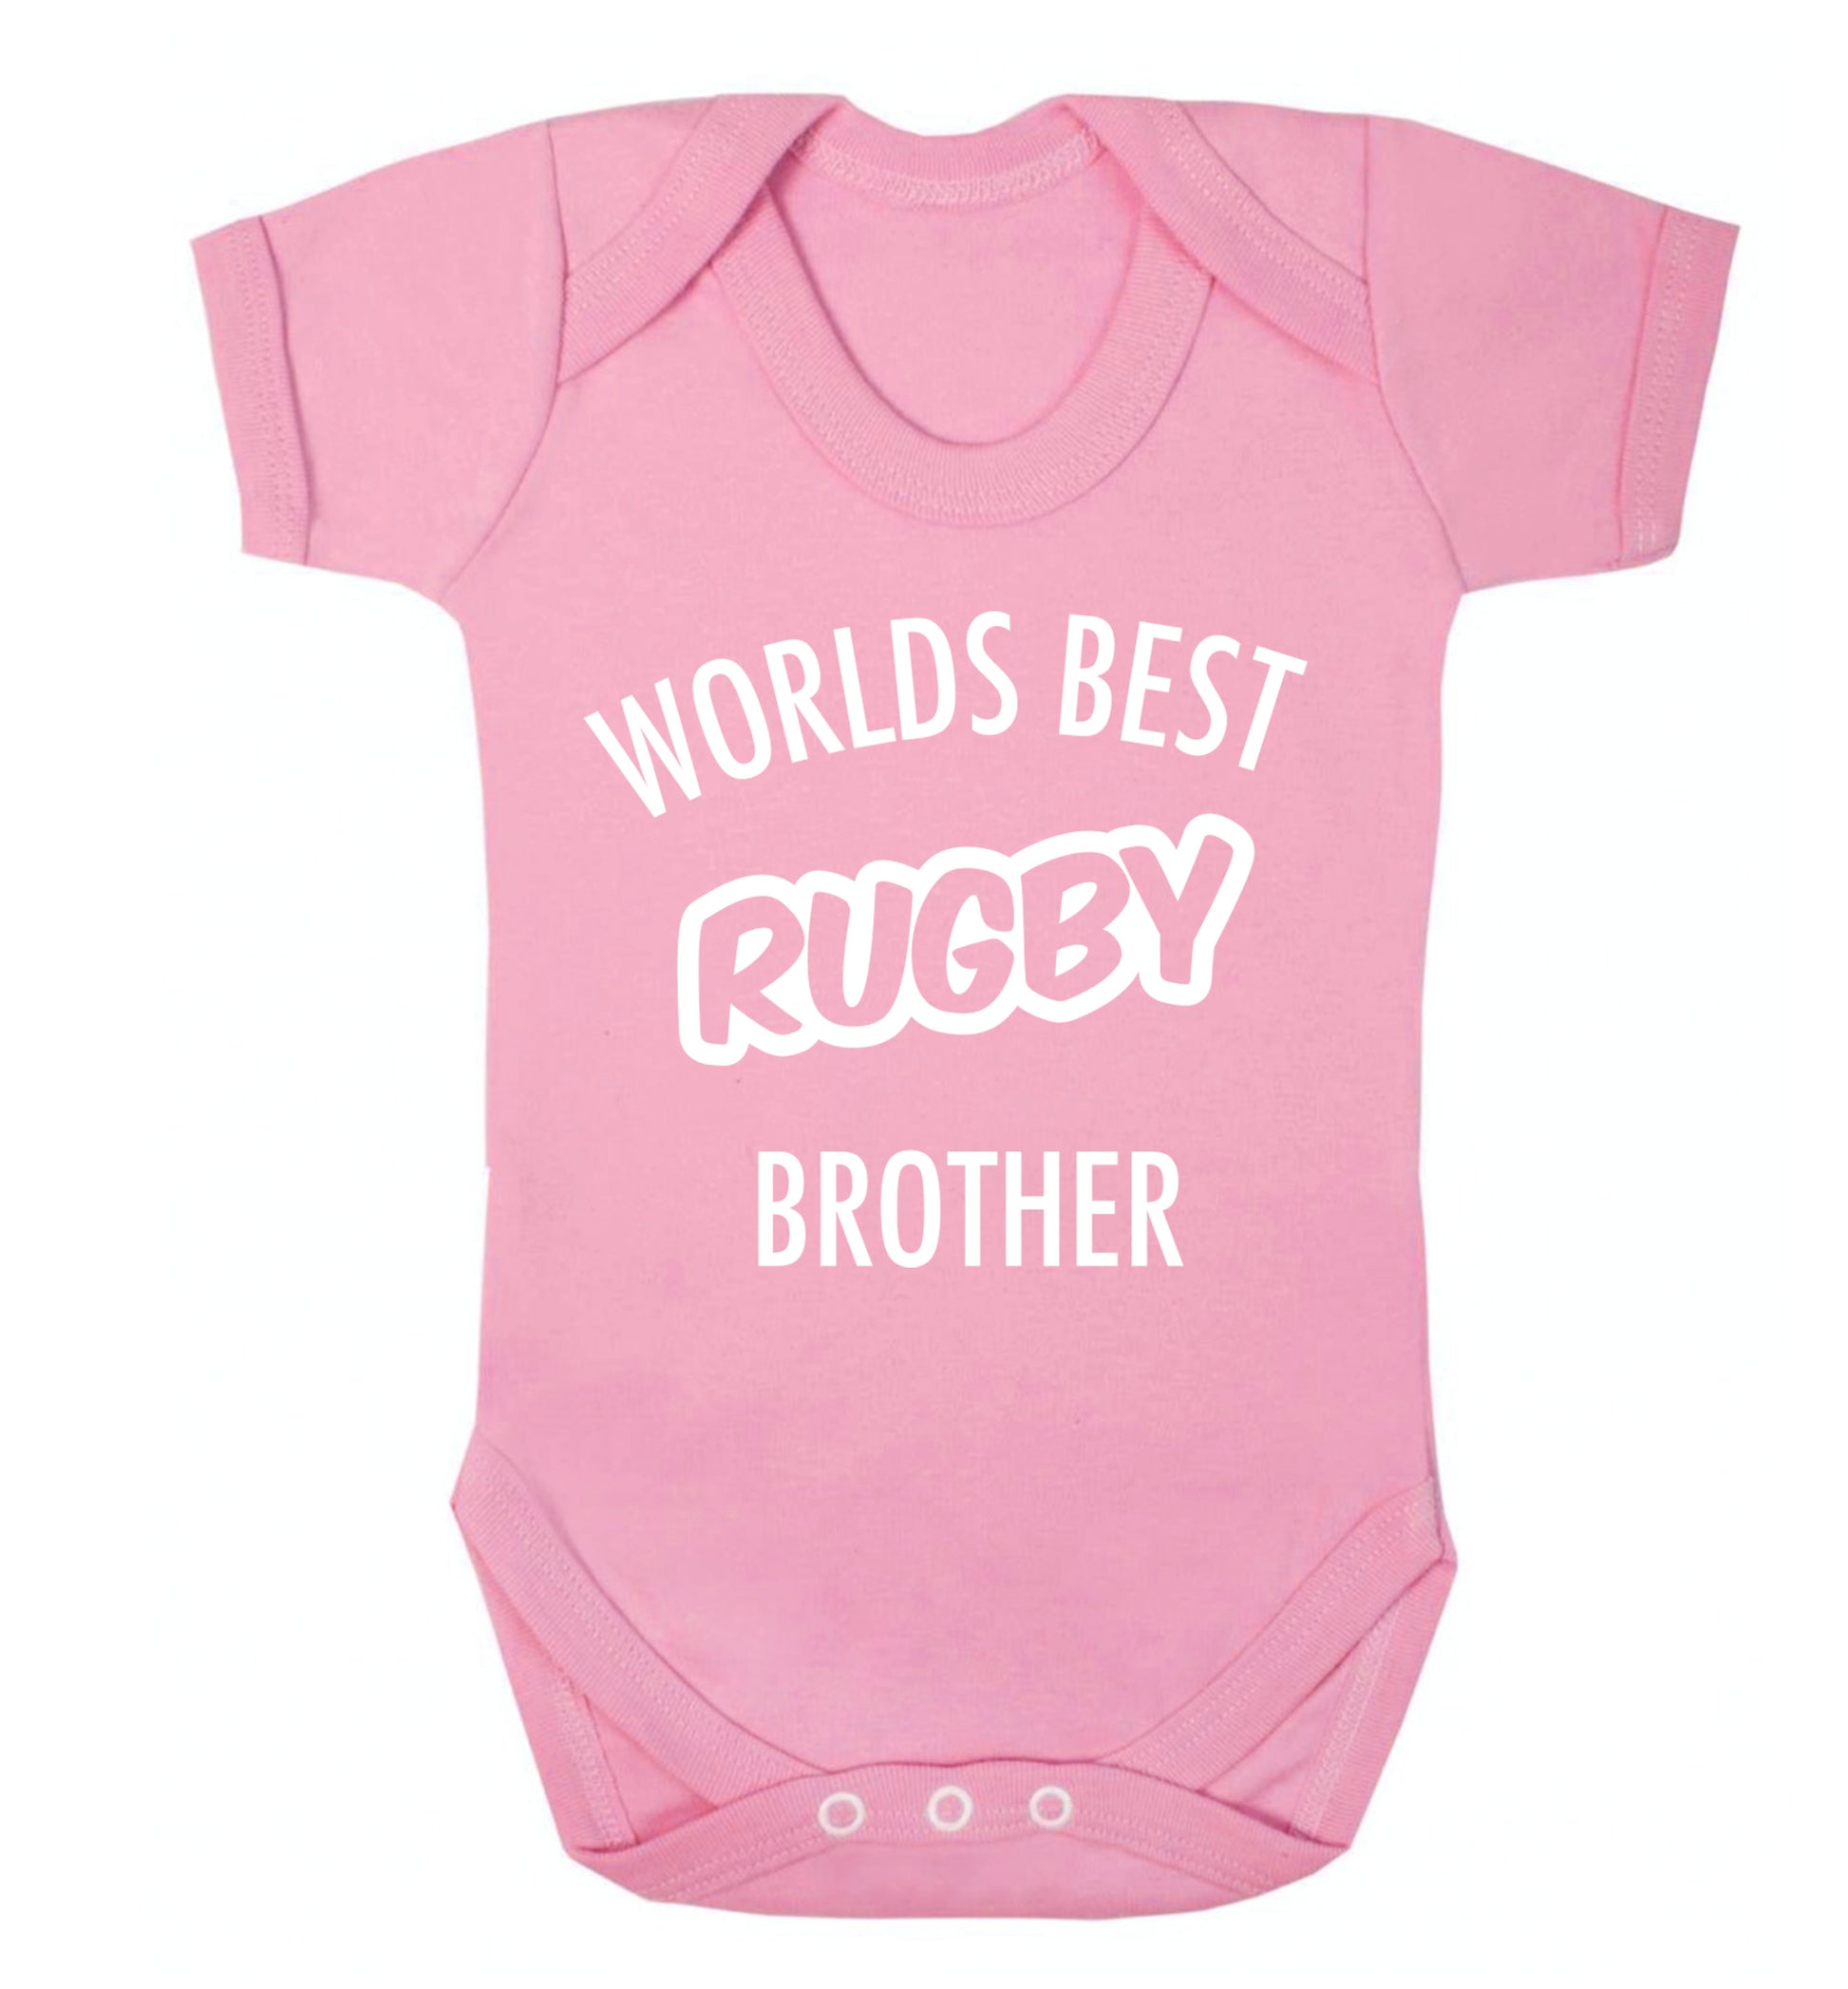 Worlds best rugby brother Baby Vest pale pink 18-24 months